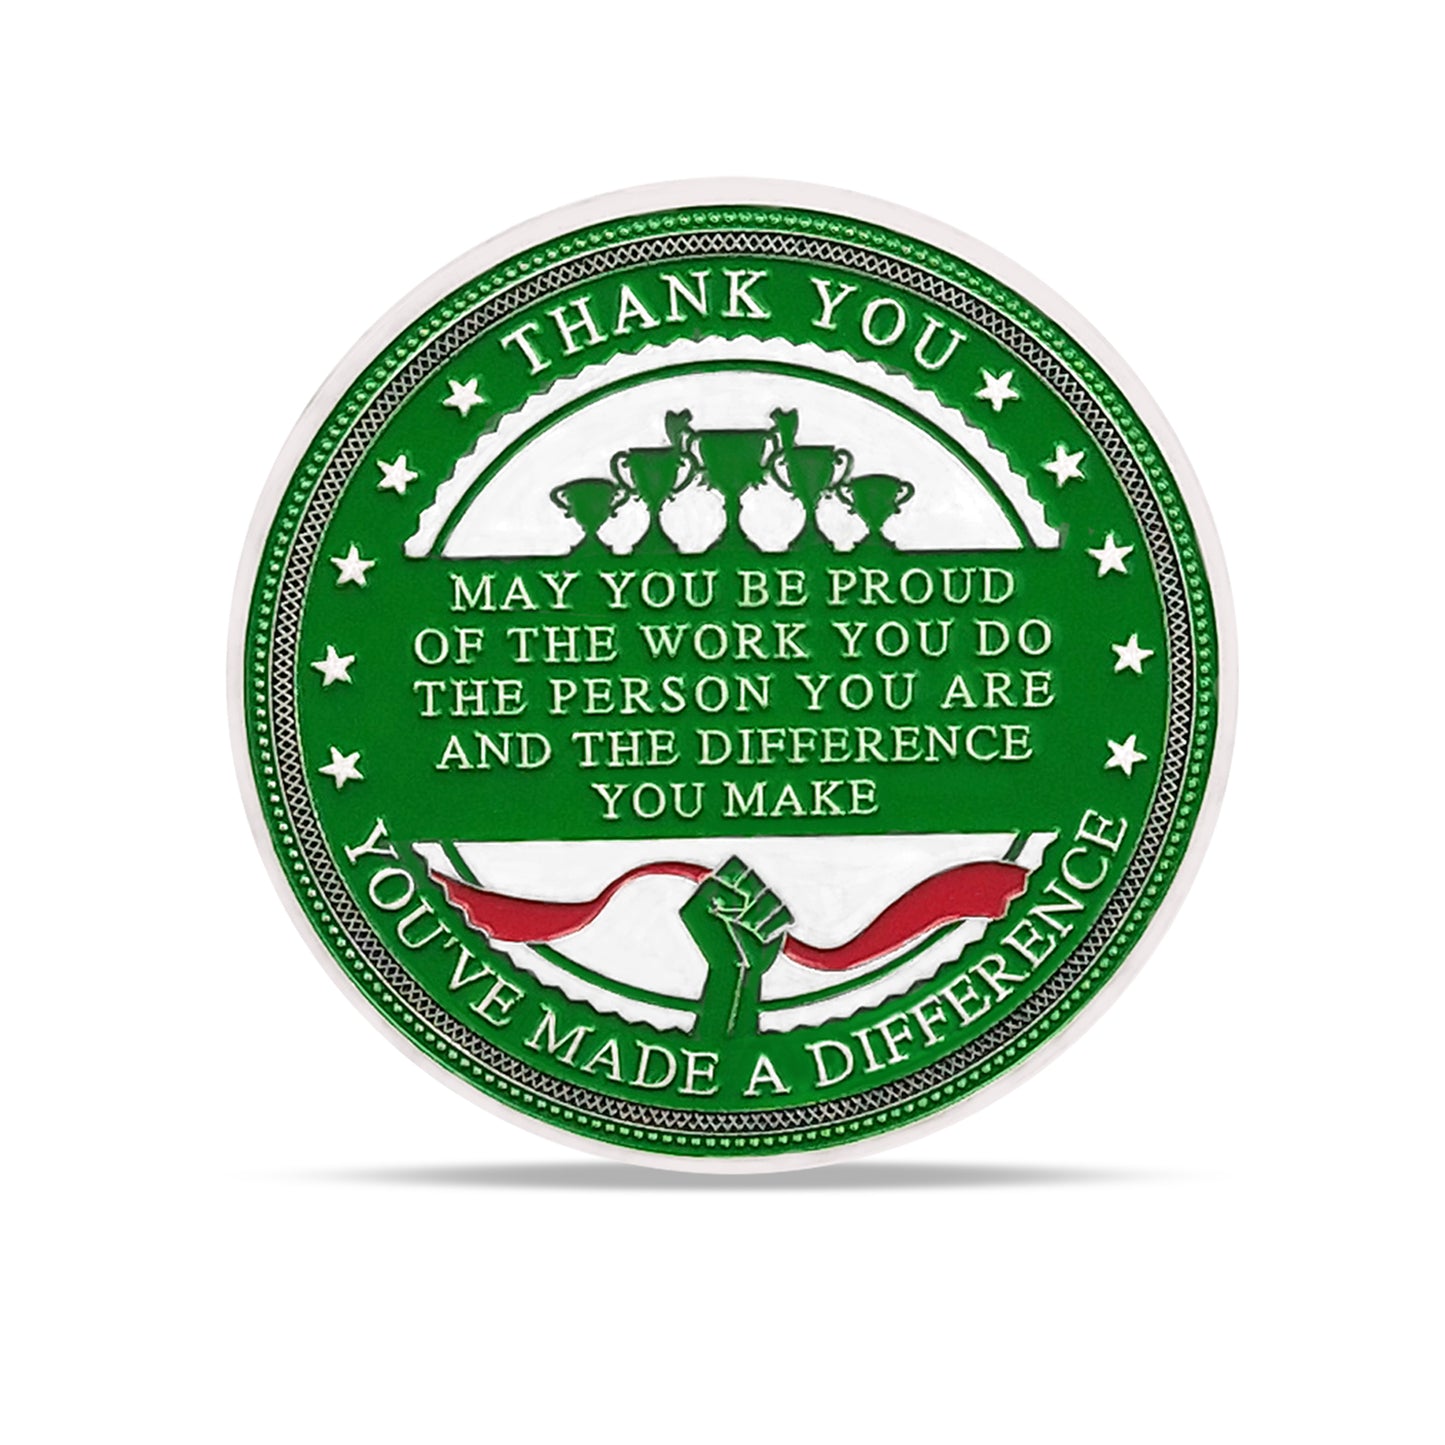 Encouragement Challenge Coin-Employee Appreciation Gifts Inspirational Thank You Coin for Students and Cowokers-Building Mastery and Skill